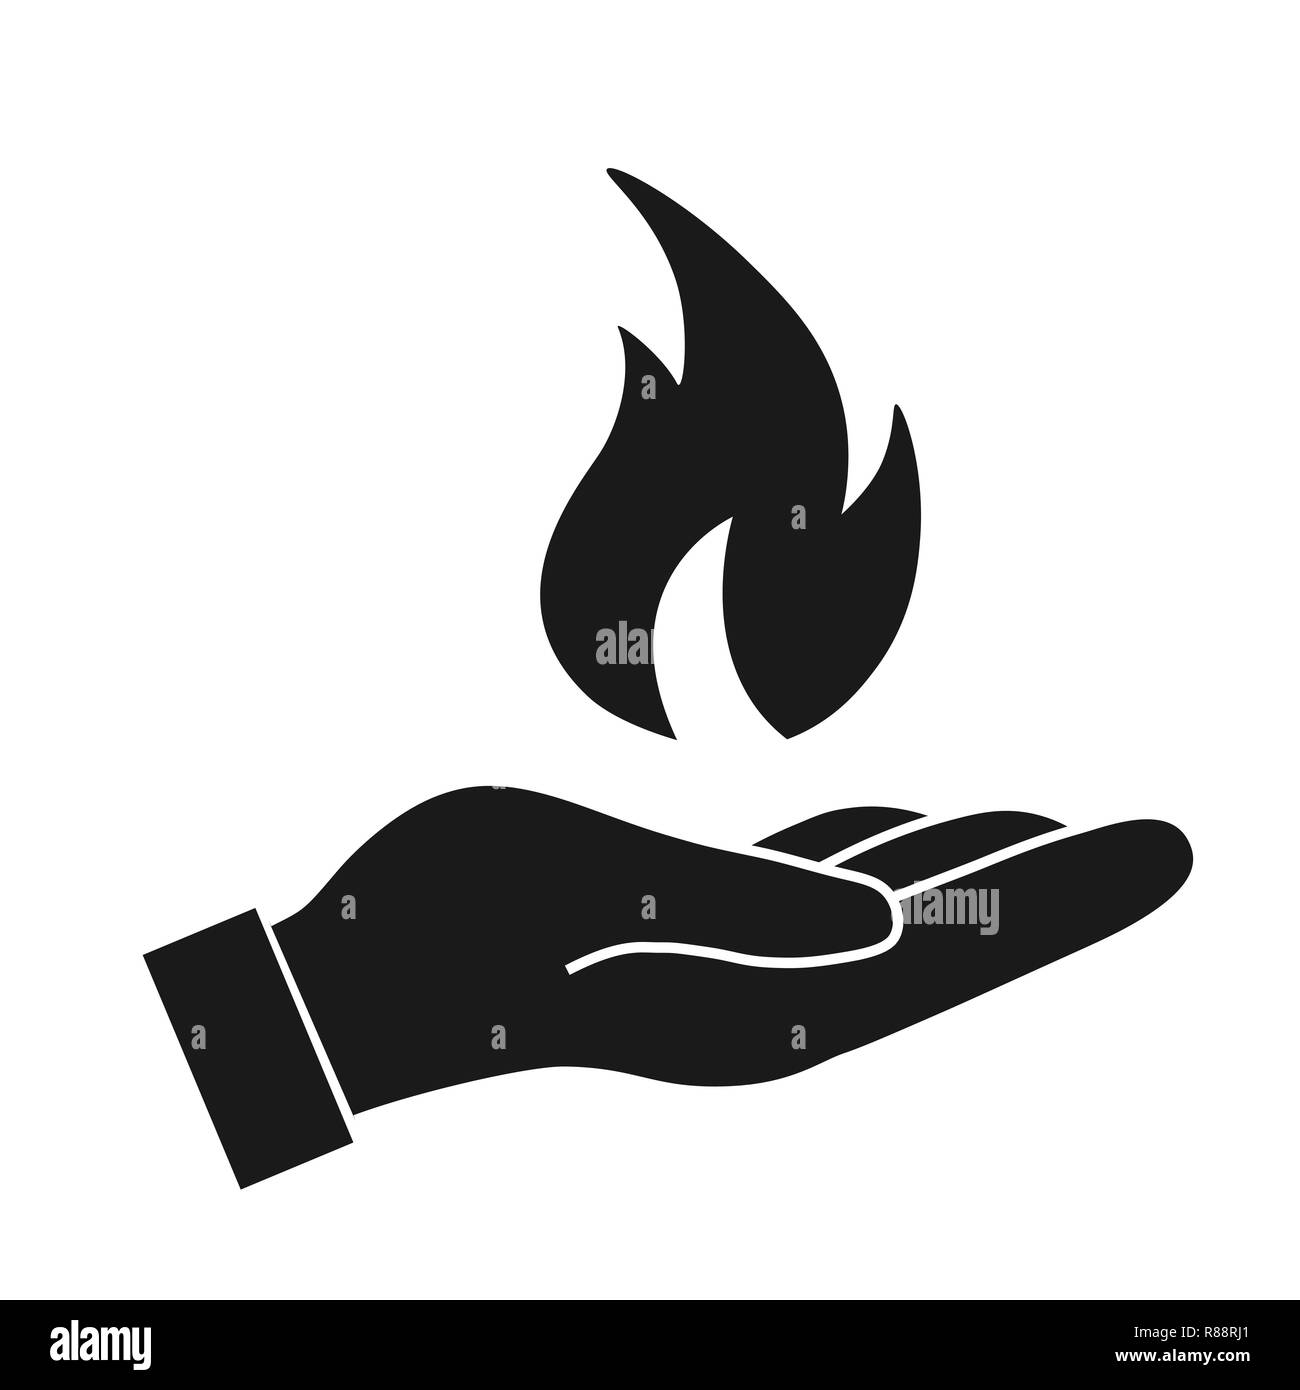 Fire flame in hand. Protection vector icon on white background Stock Vector